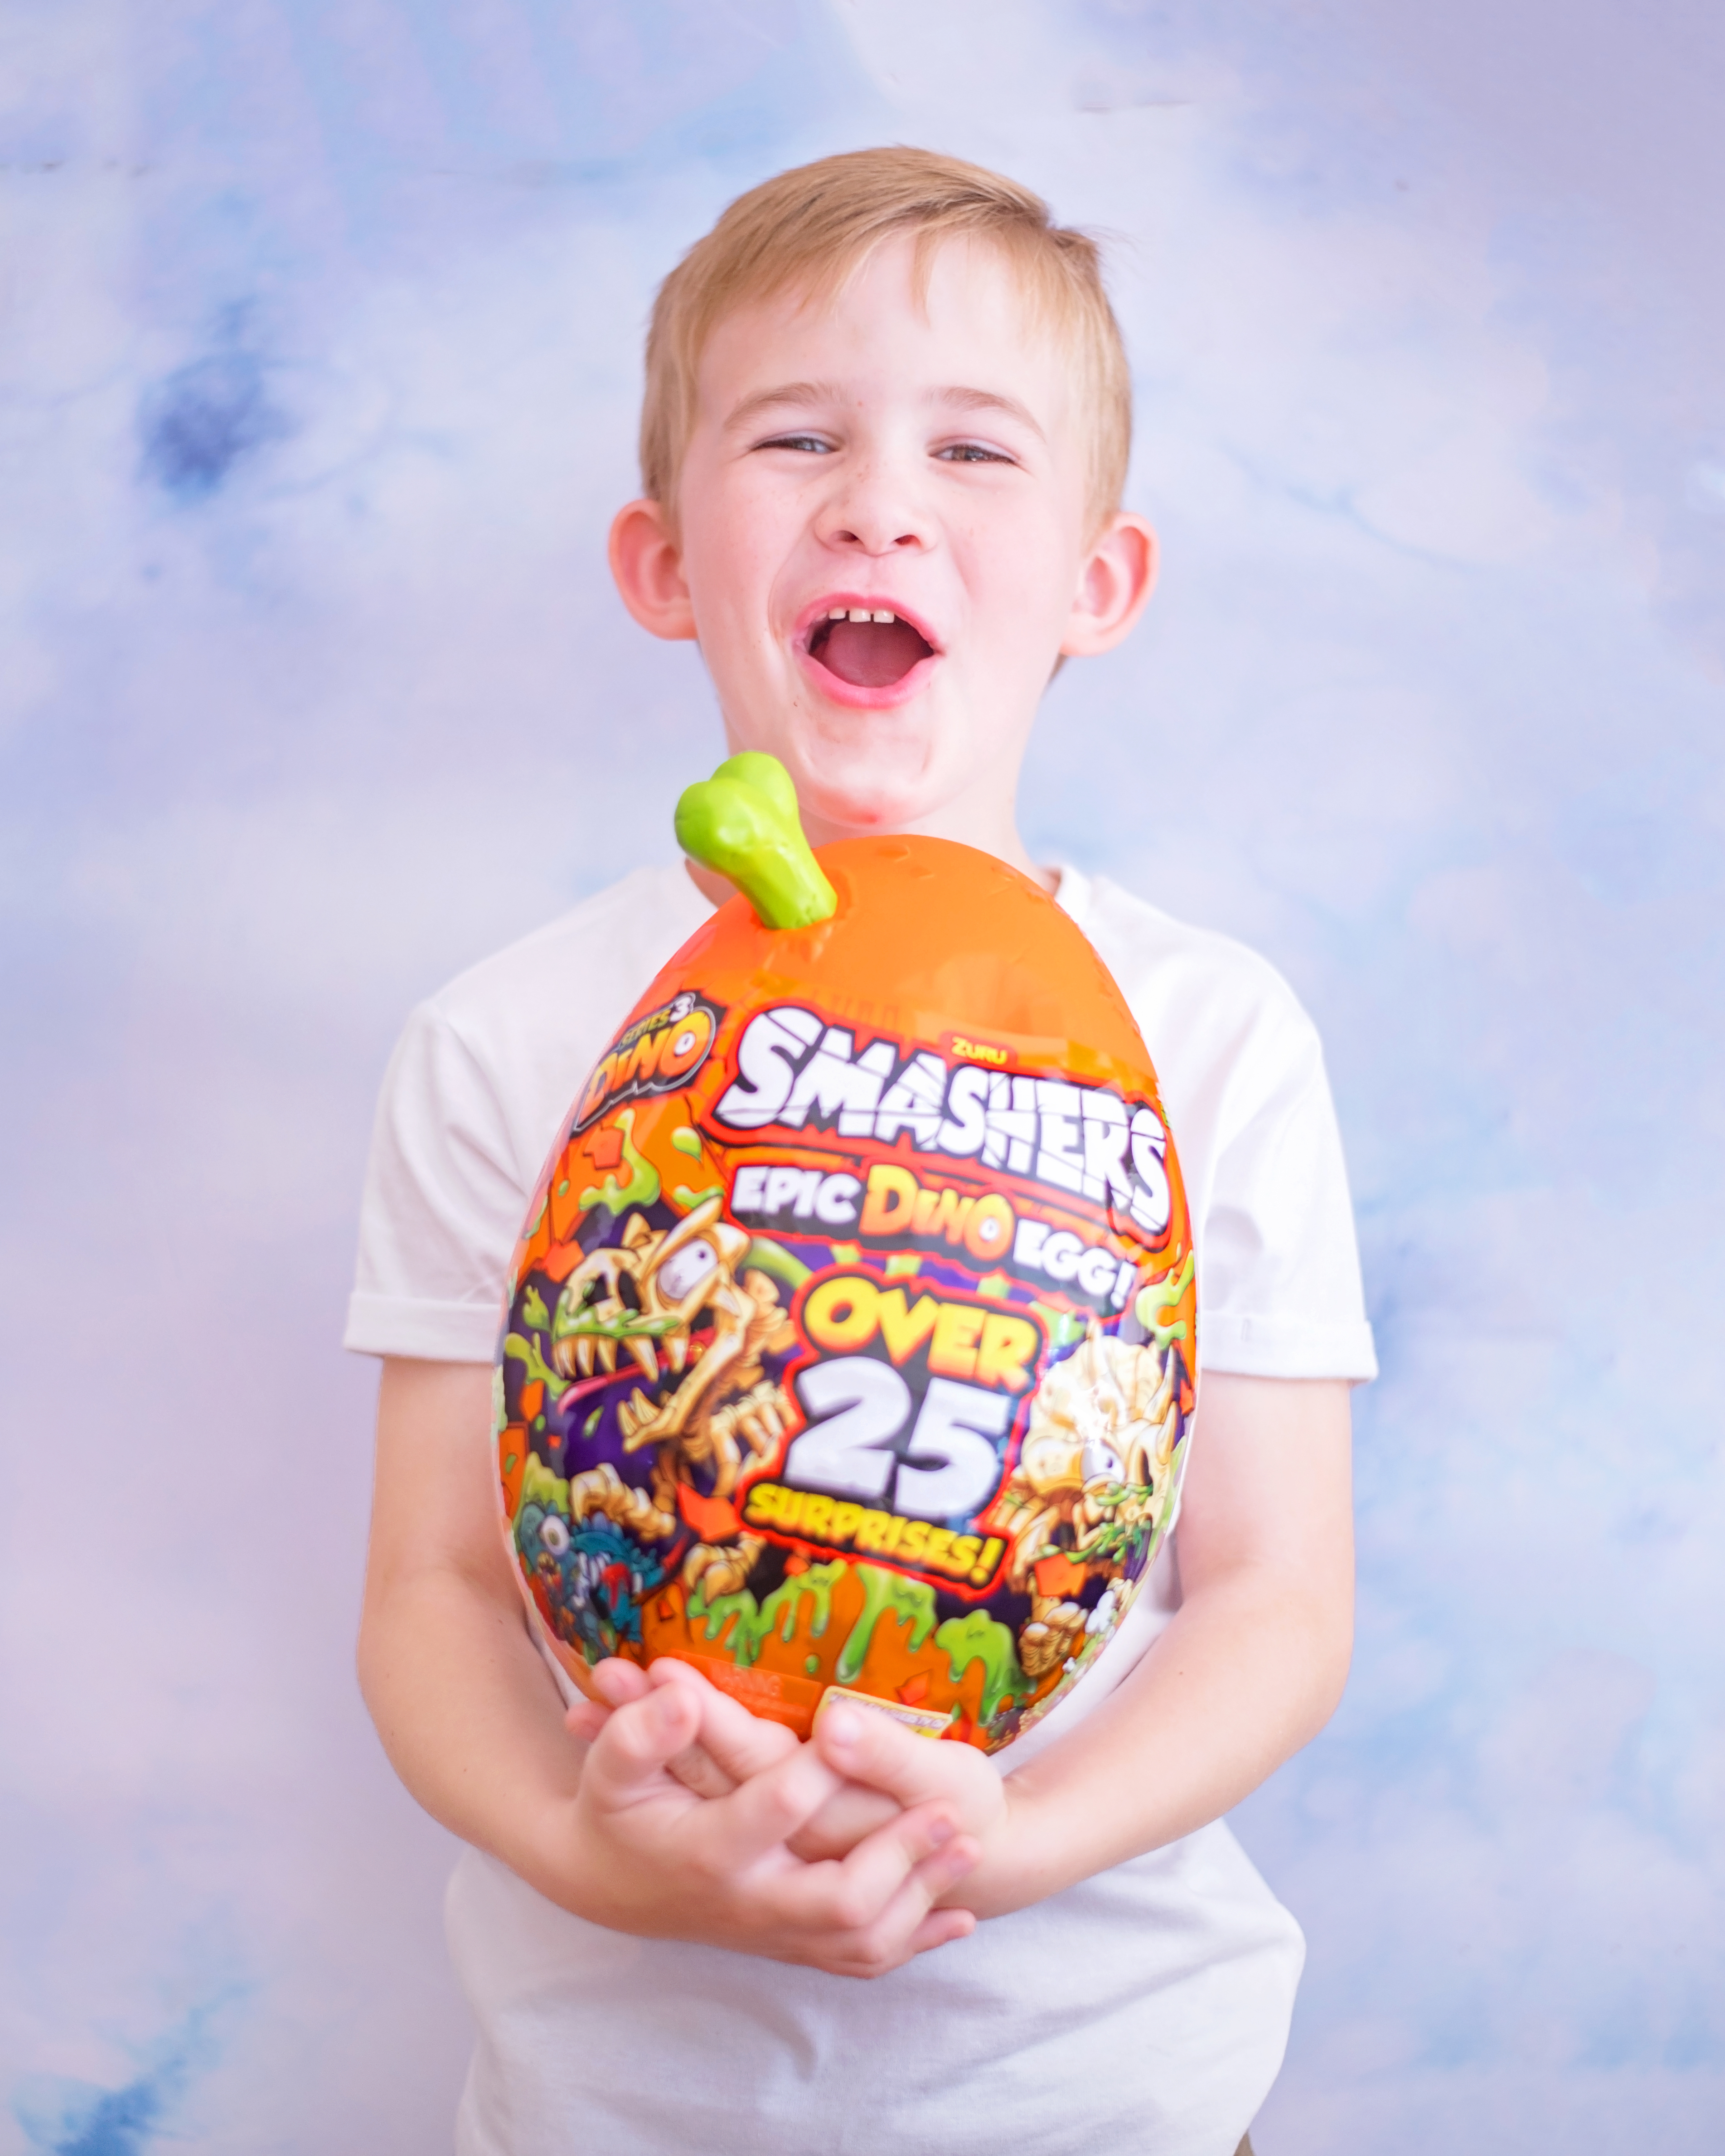 WHAT’S IN THE ZURU SMASHERS EPIC DINO EGG?  [GIVEAWAY]